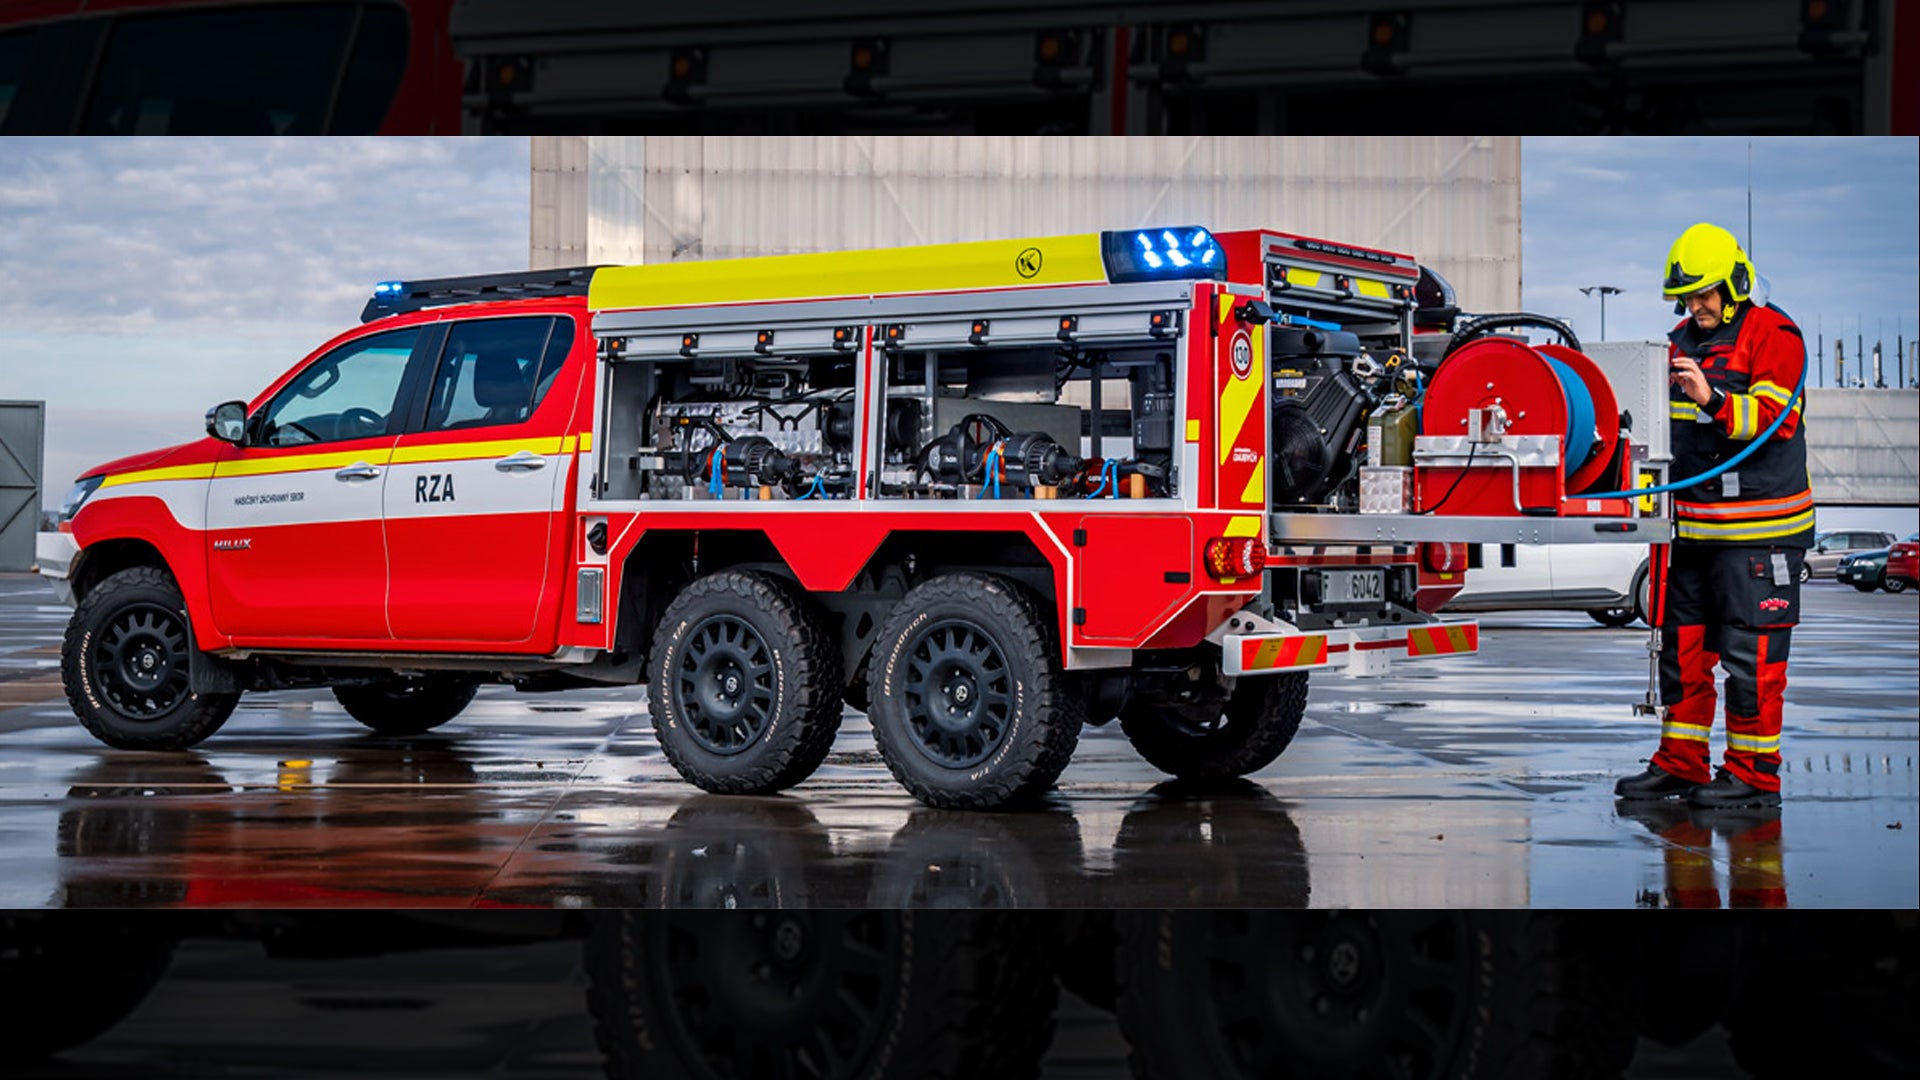 upfitter-builds-toyota-hilux-6x6s-for-almost-everything,-from-fire-fighting-to-mining